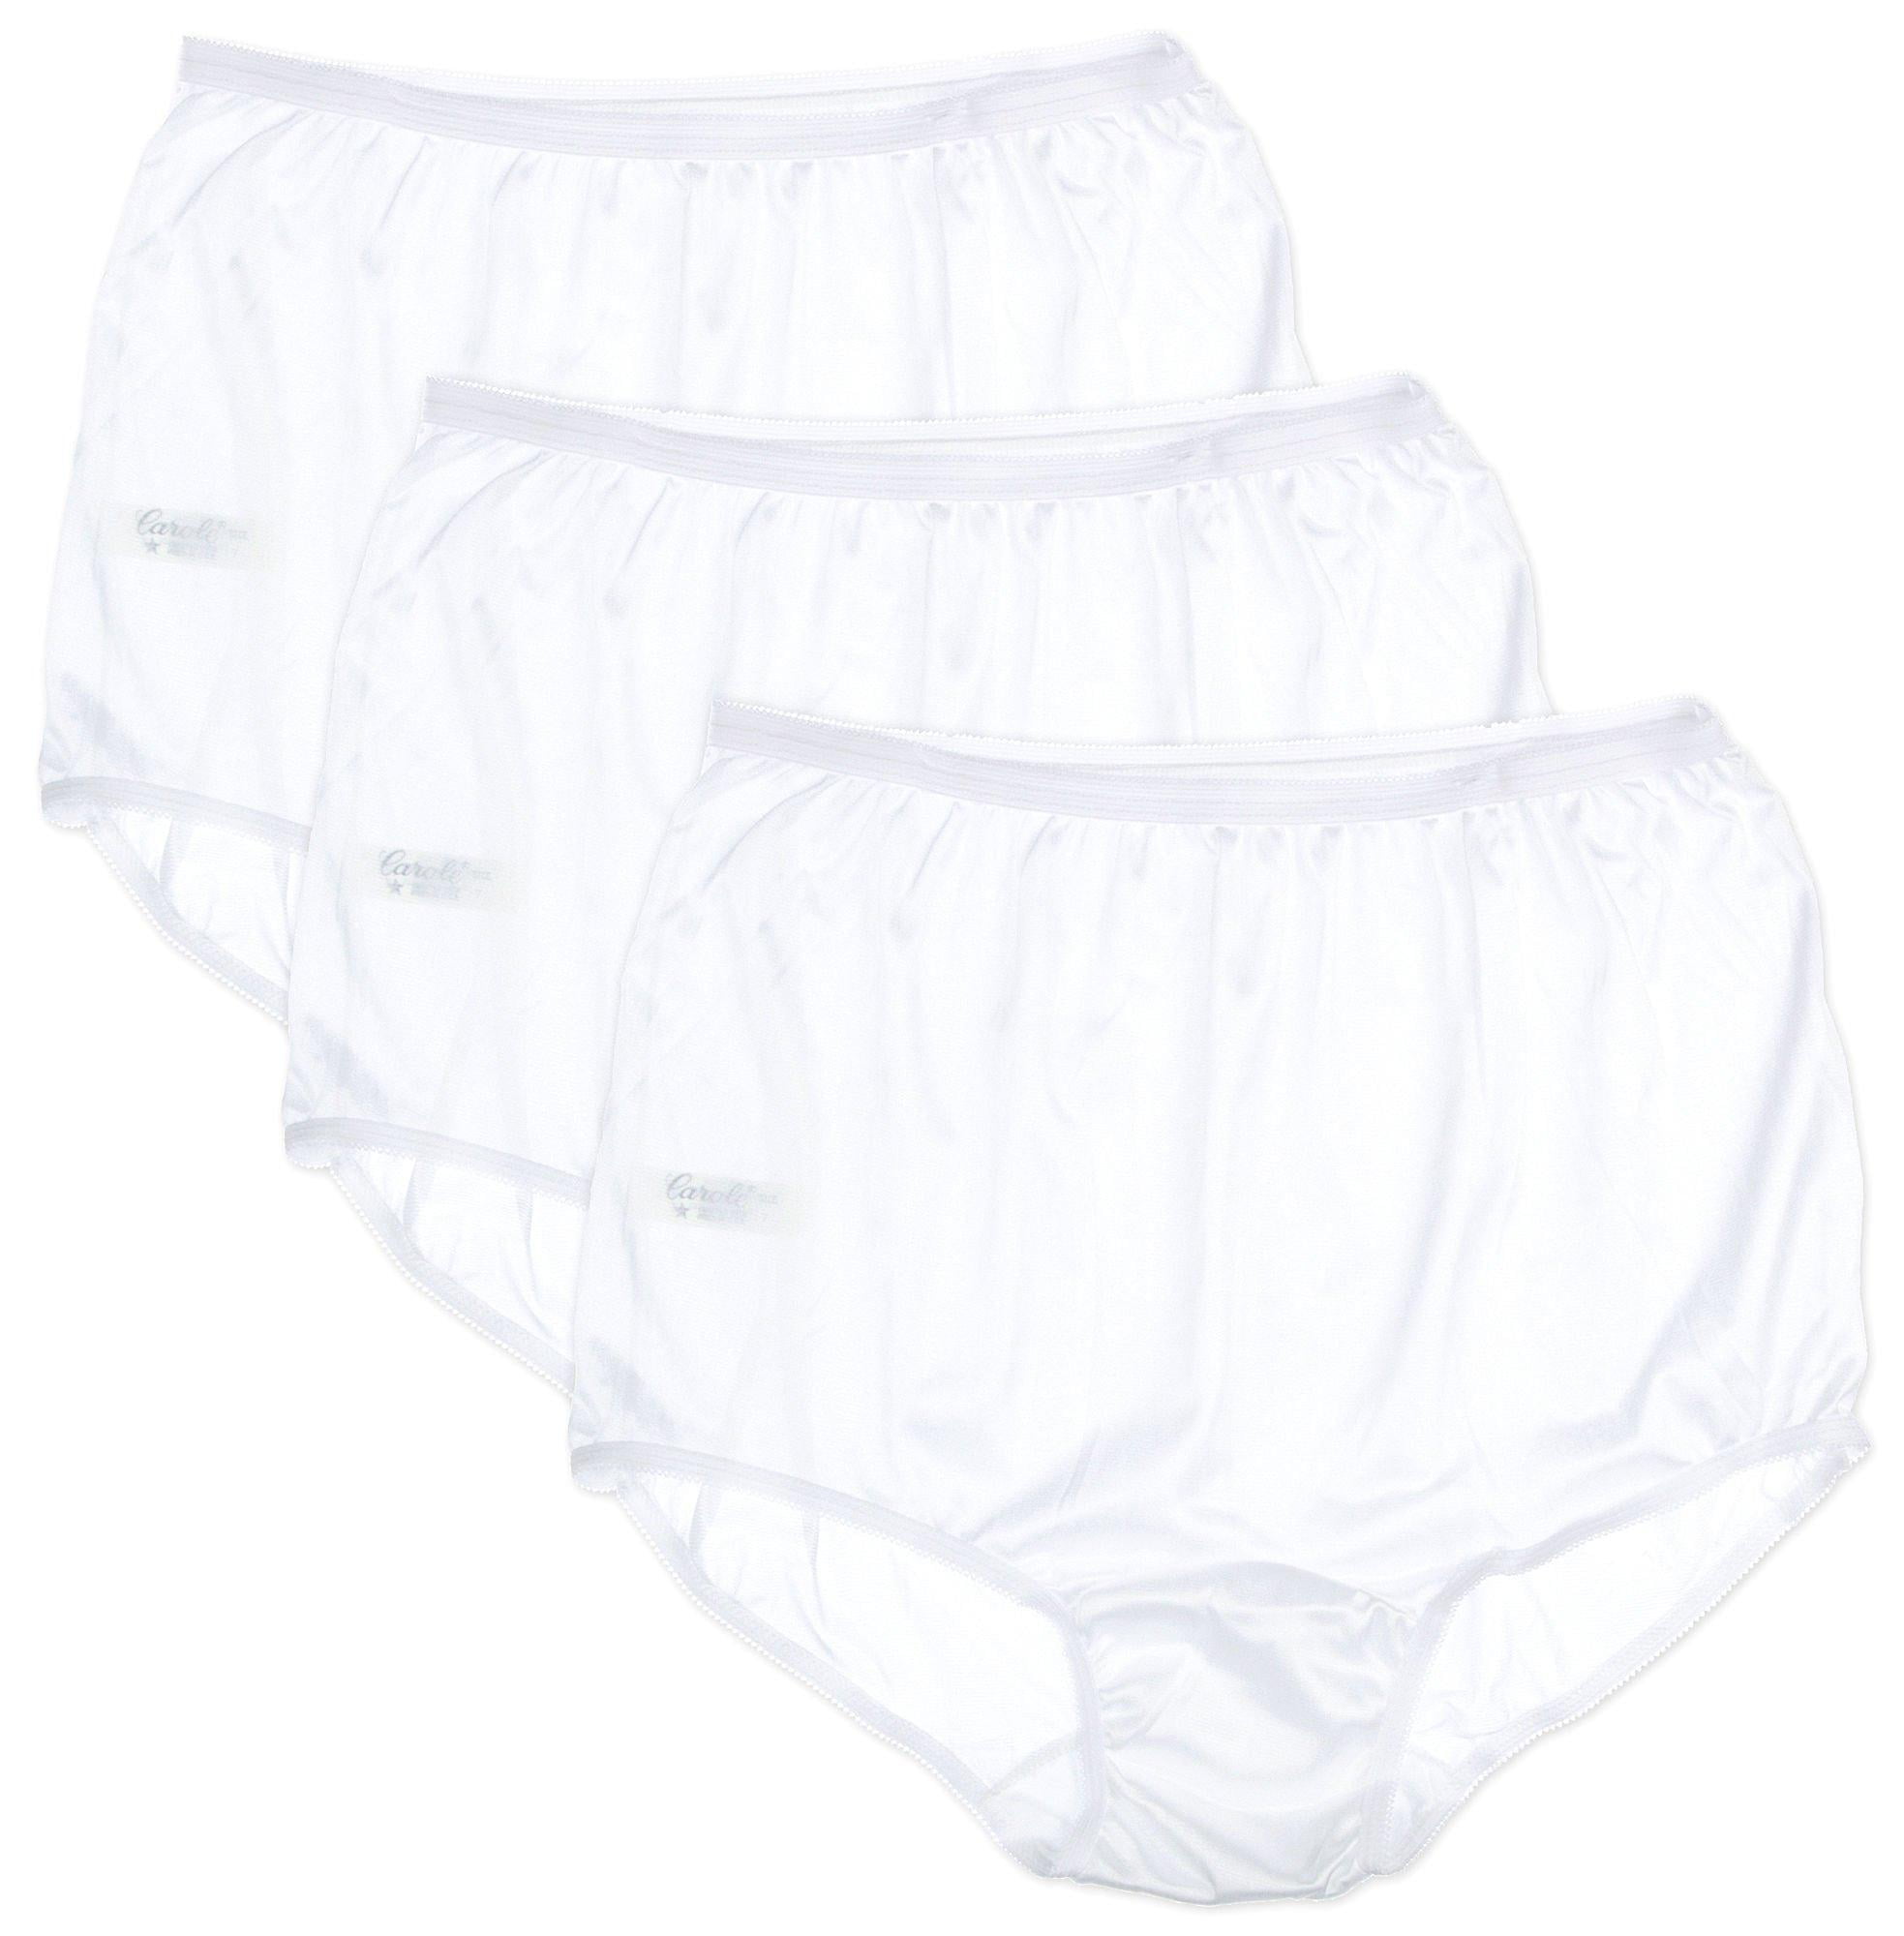 UNDERWEAR FOR MEN STYLE #888 NYLON PANTIES BY CAROLE WHITE IN ALL SIZES 